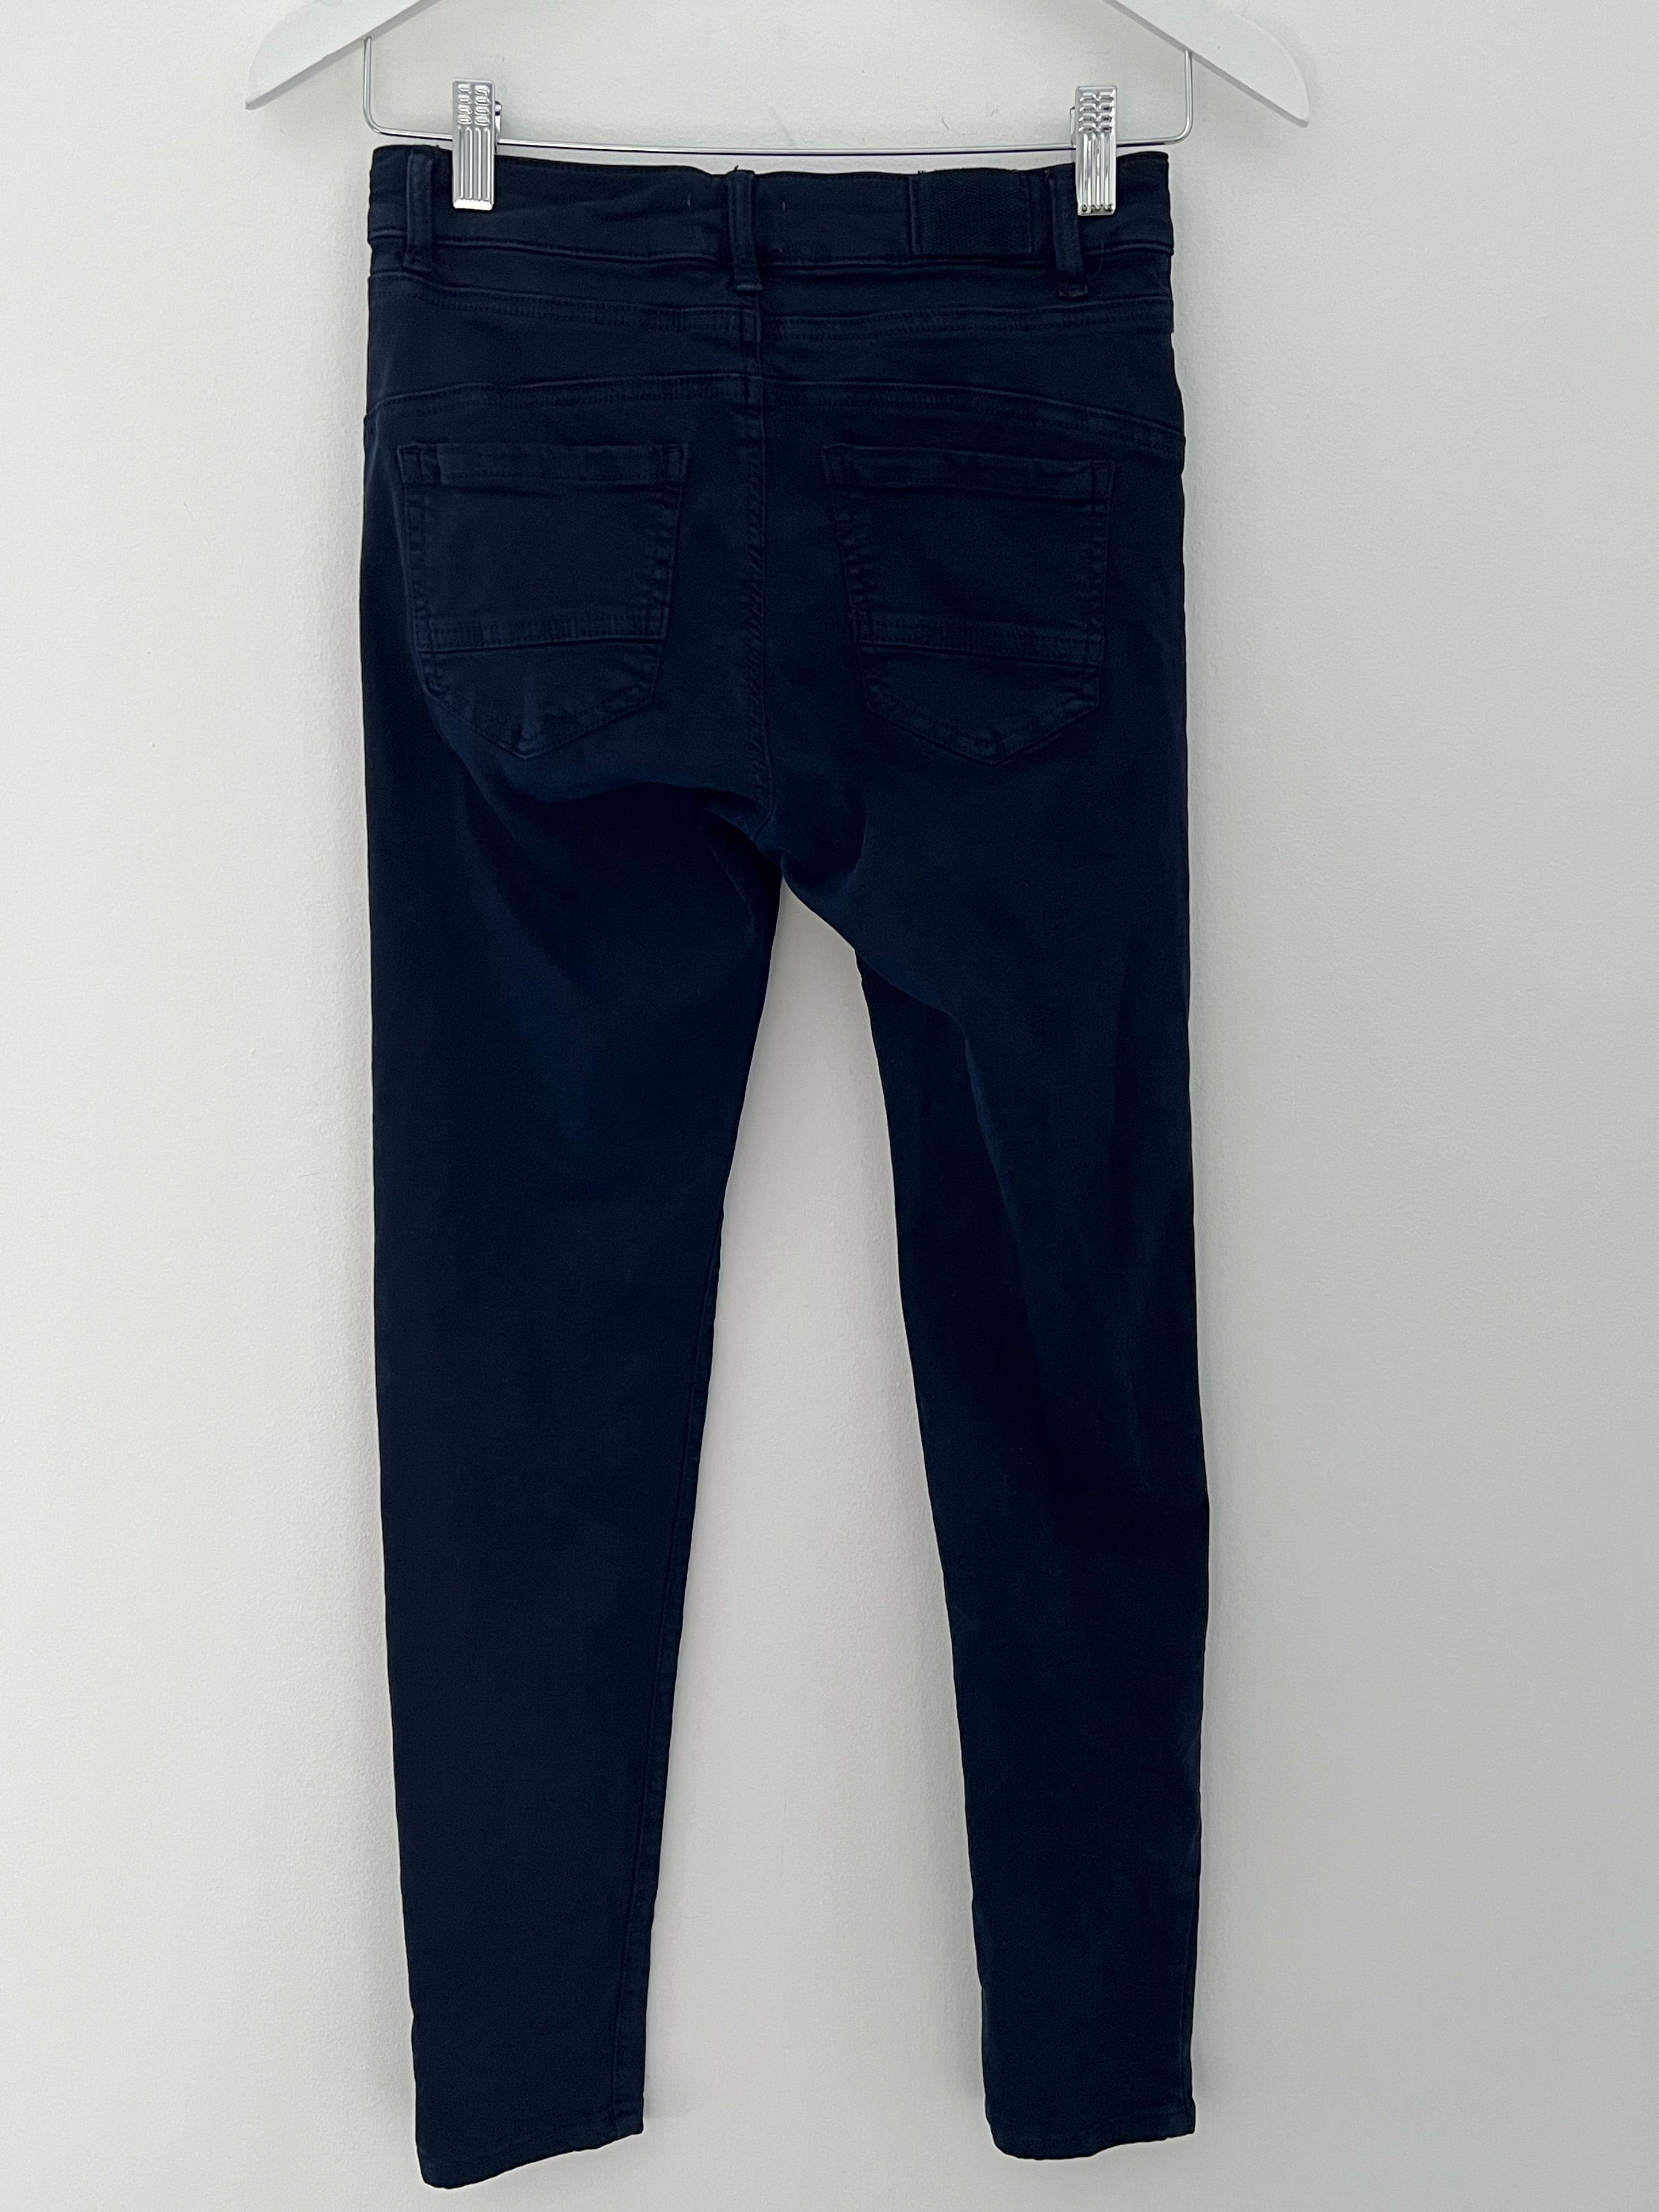 Button Fly Stretch Jeans in Ink